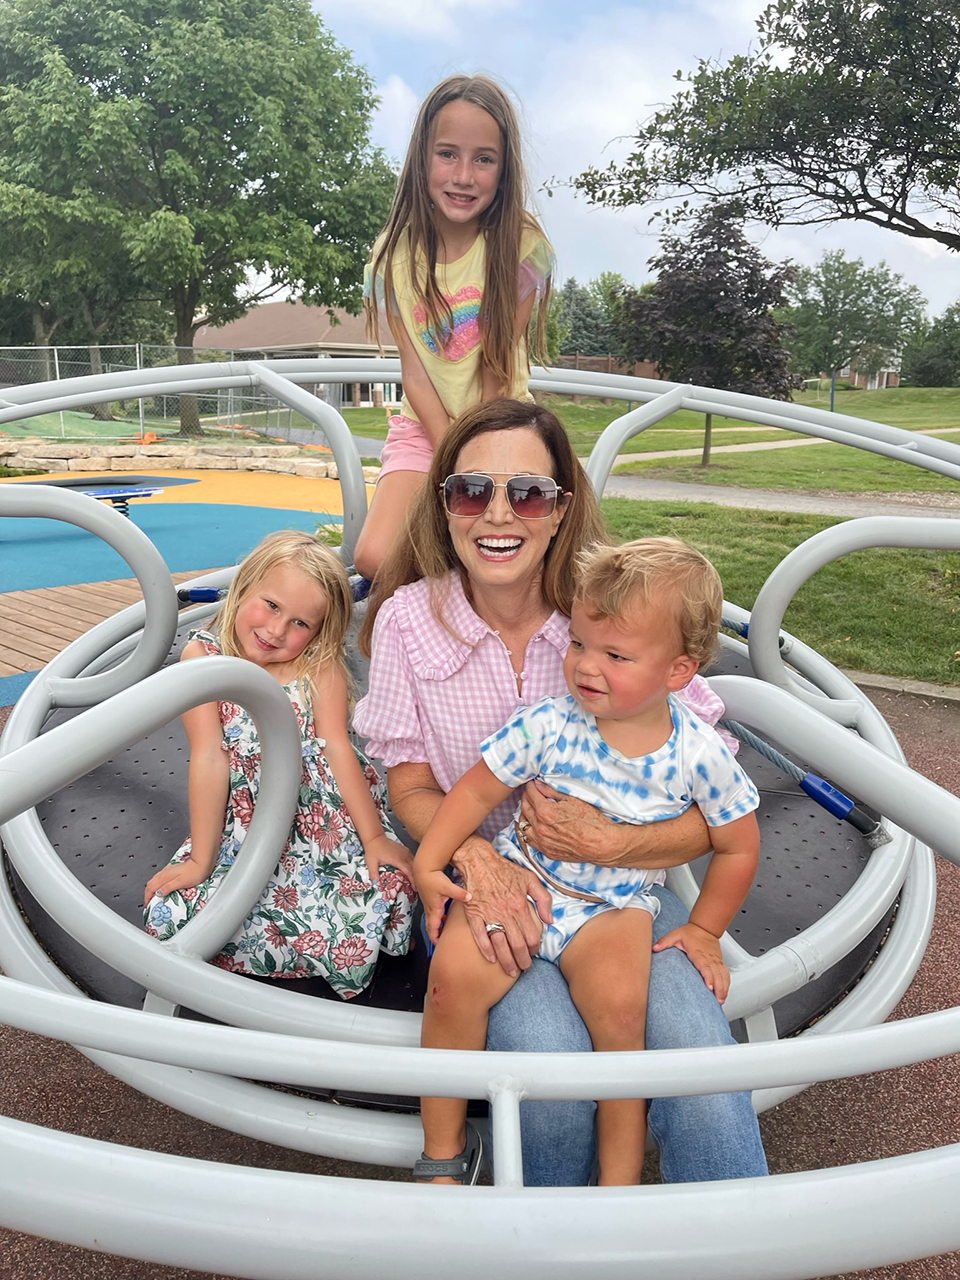 Nancy Weiss with her two daughters on a playground.